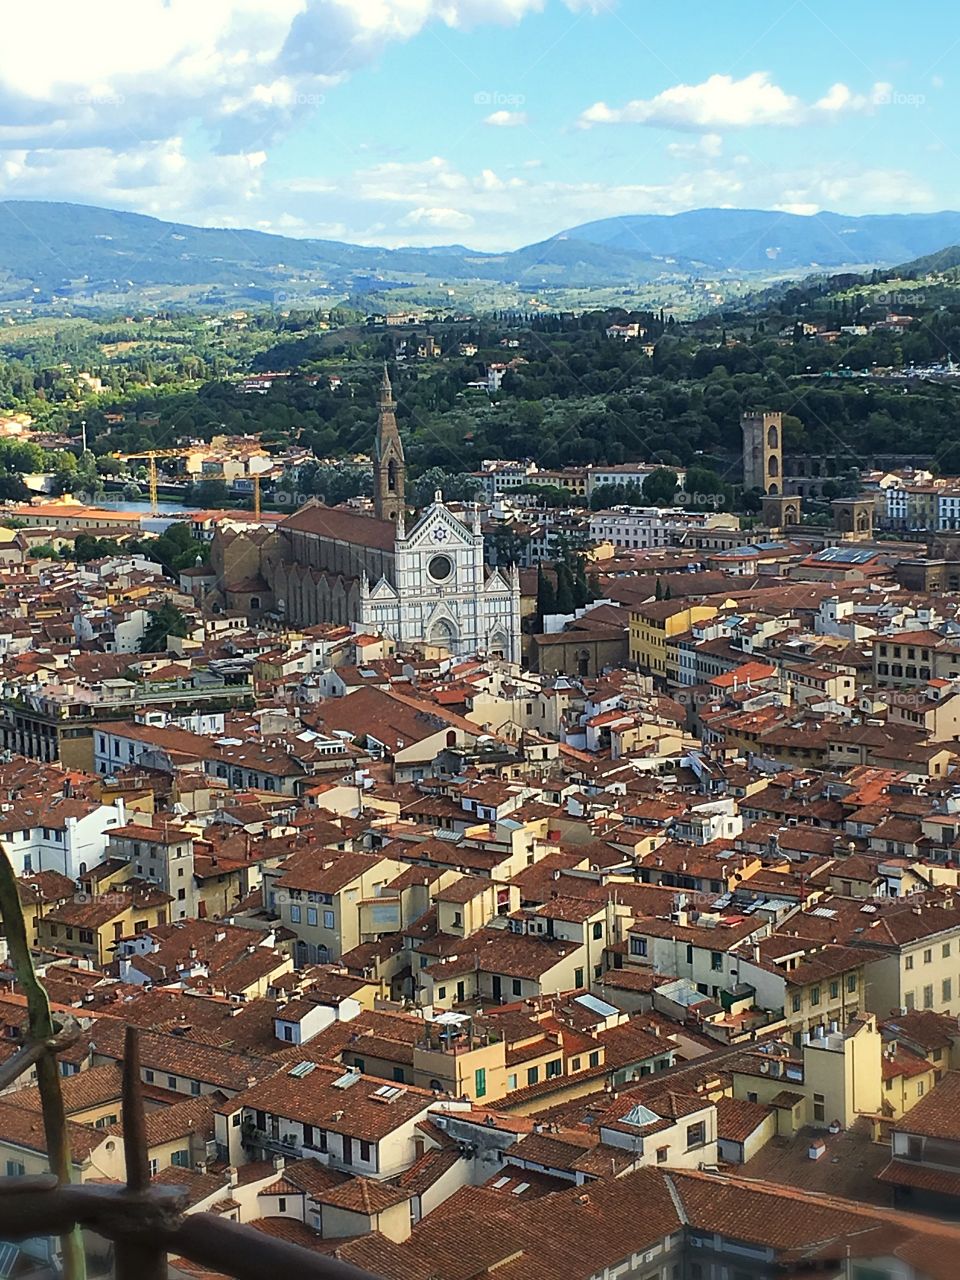 Santa Croce, Florence from above